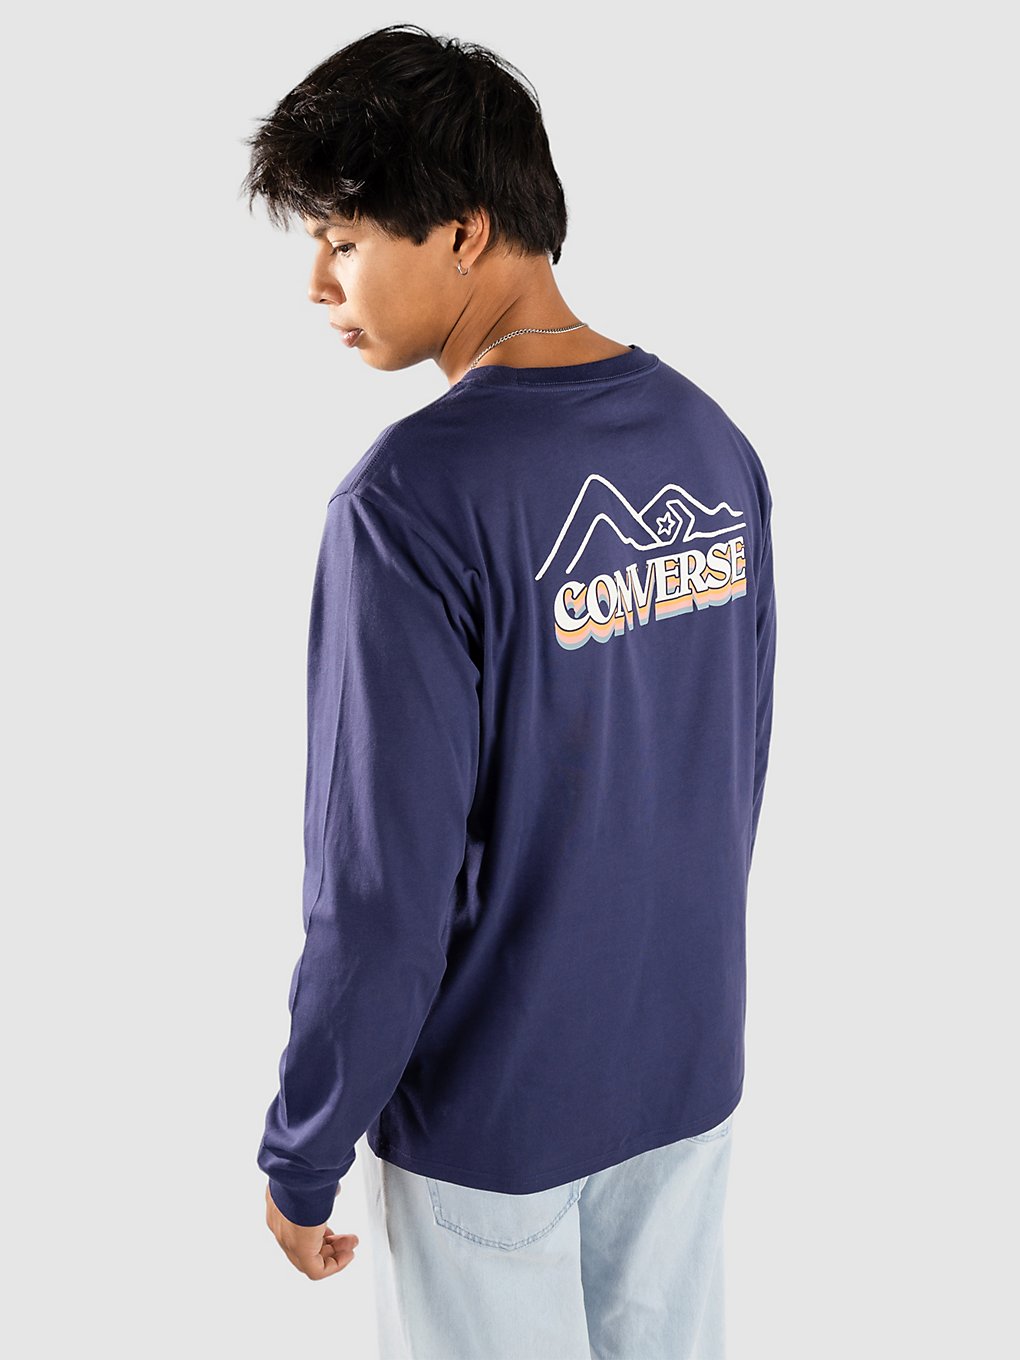 converse cc winter vibes graphic longsleeve uncharted waters